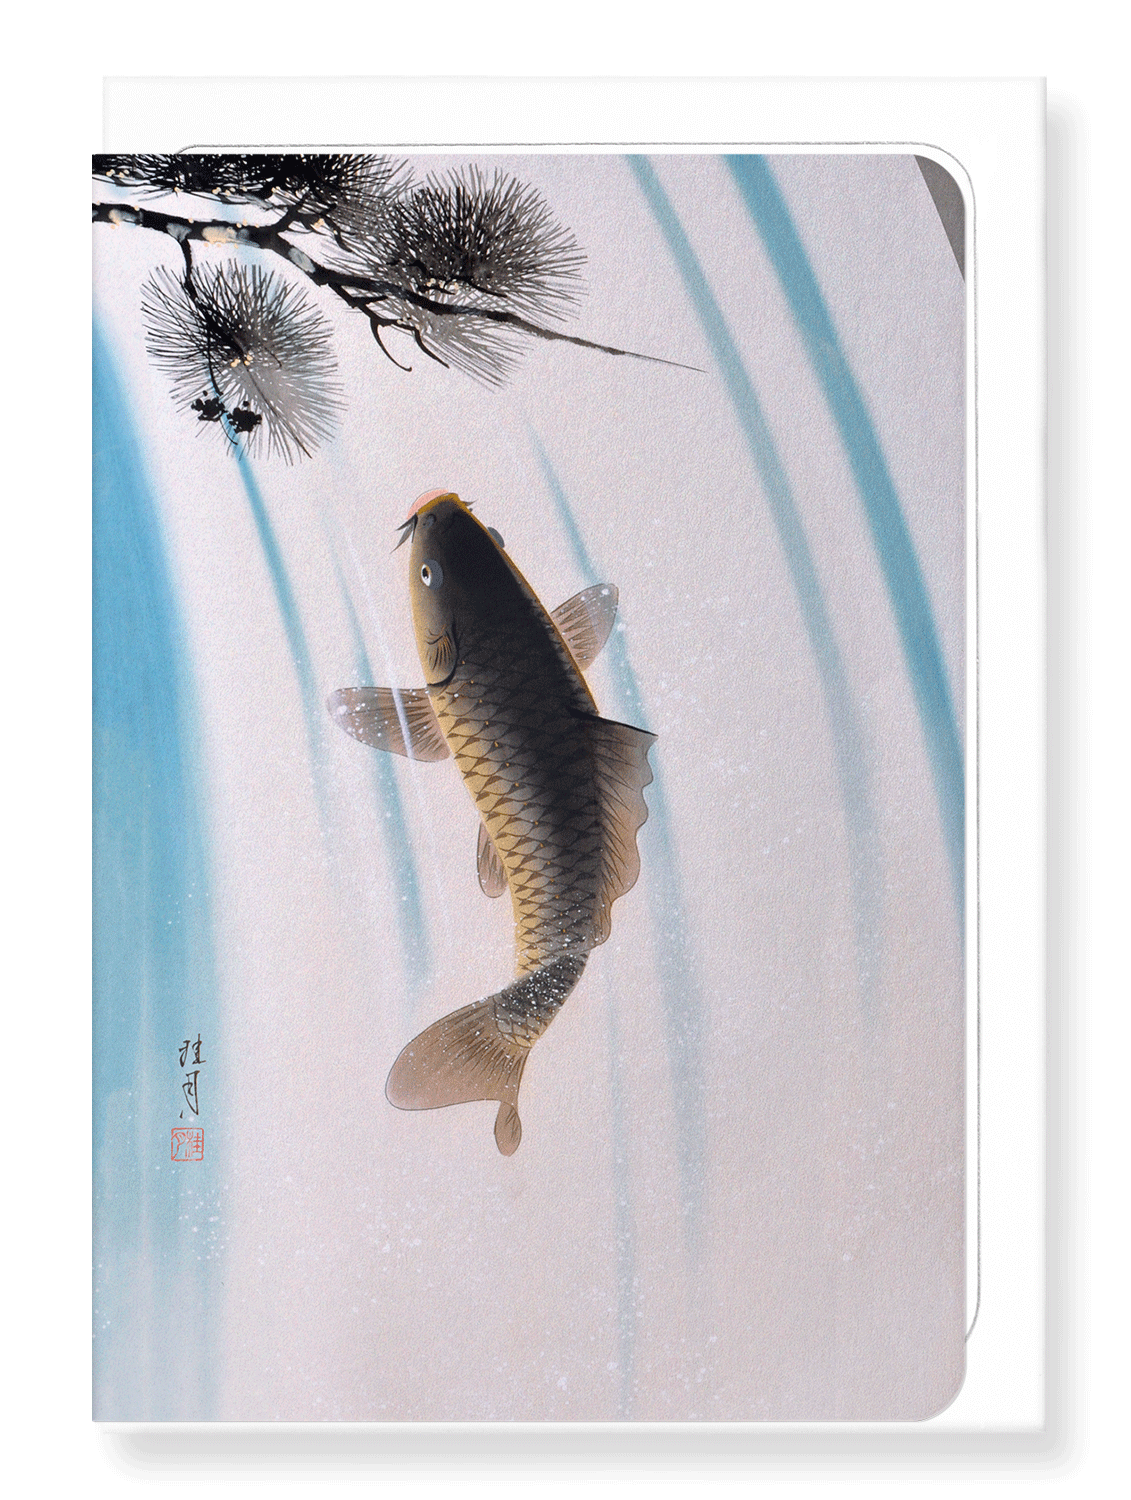 Ezen Designs - Carp and waterfall - Greeting Card - Front